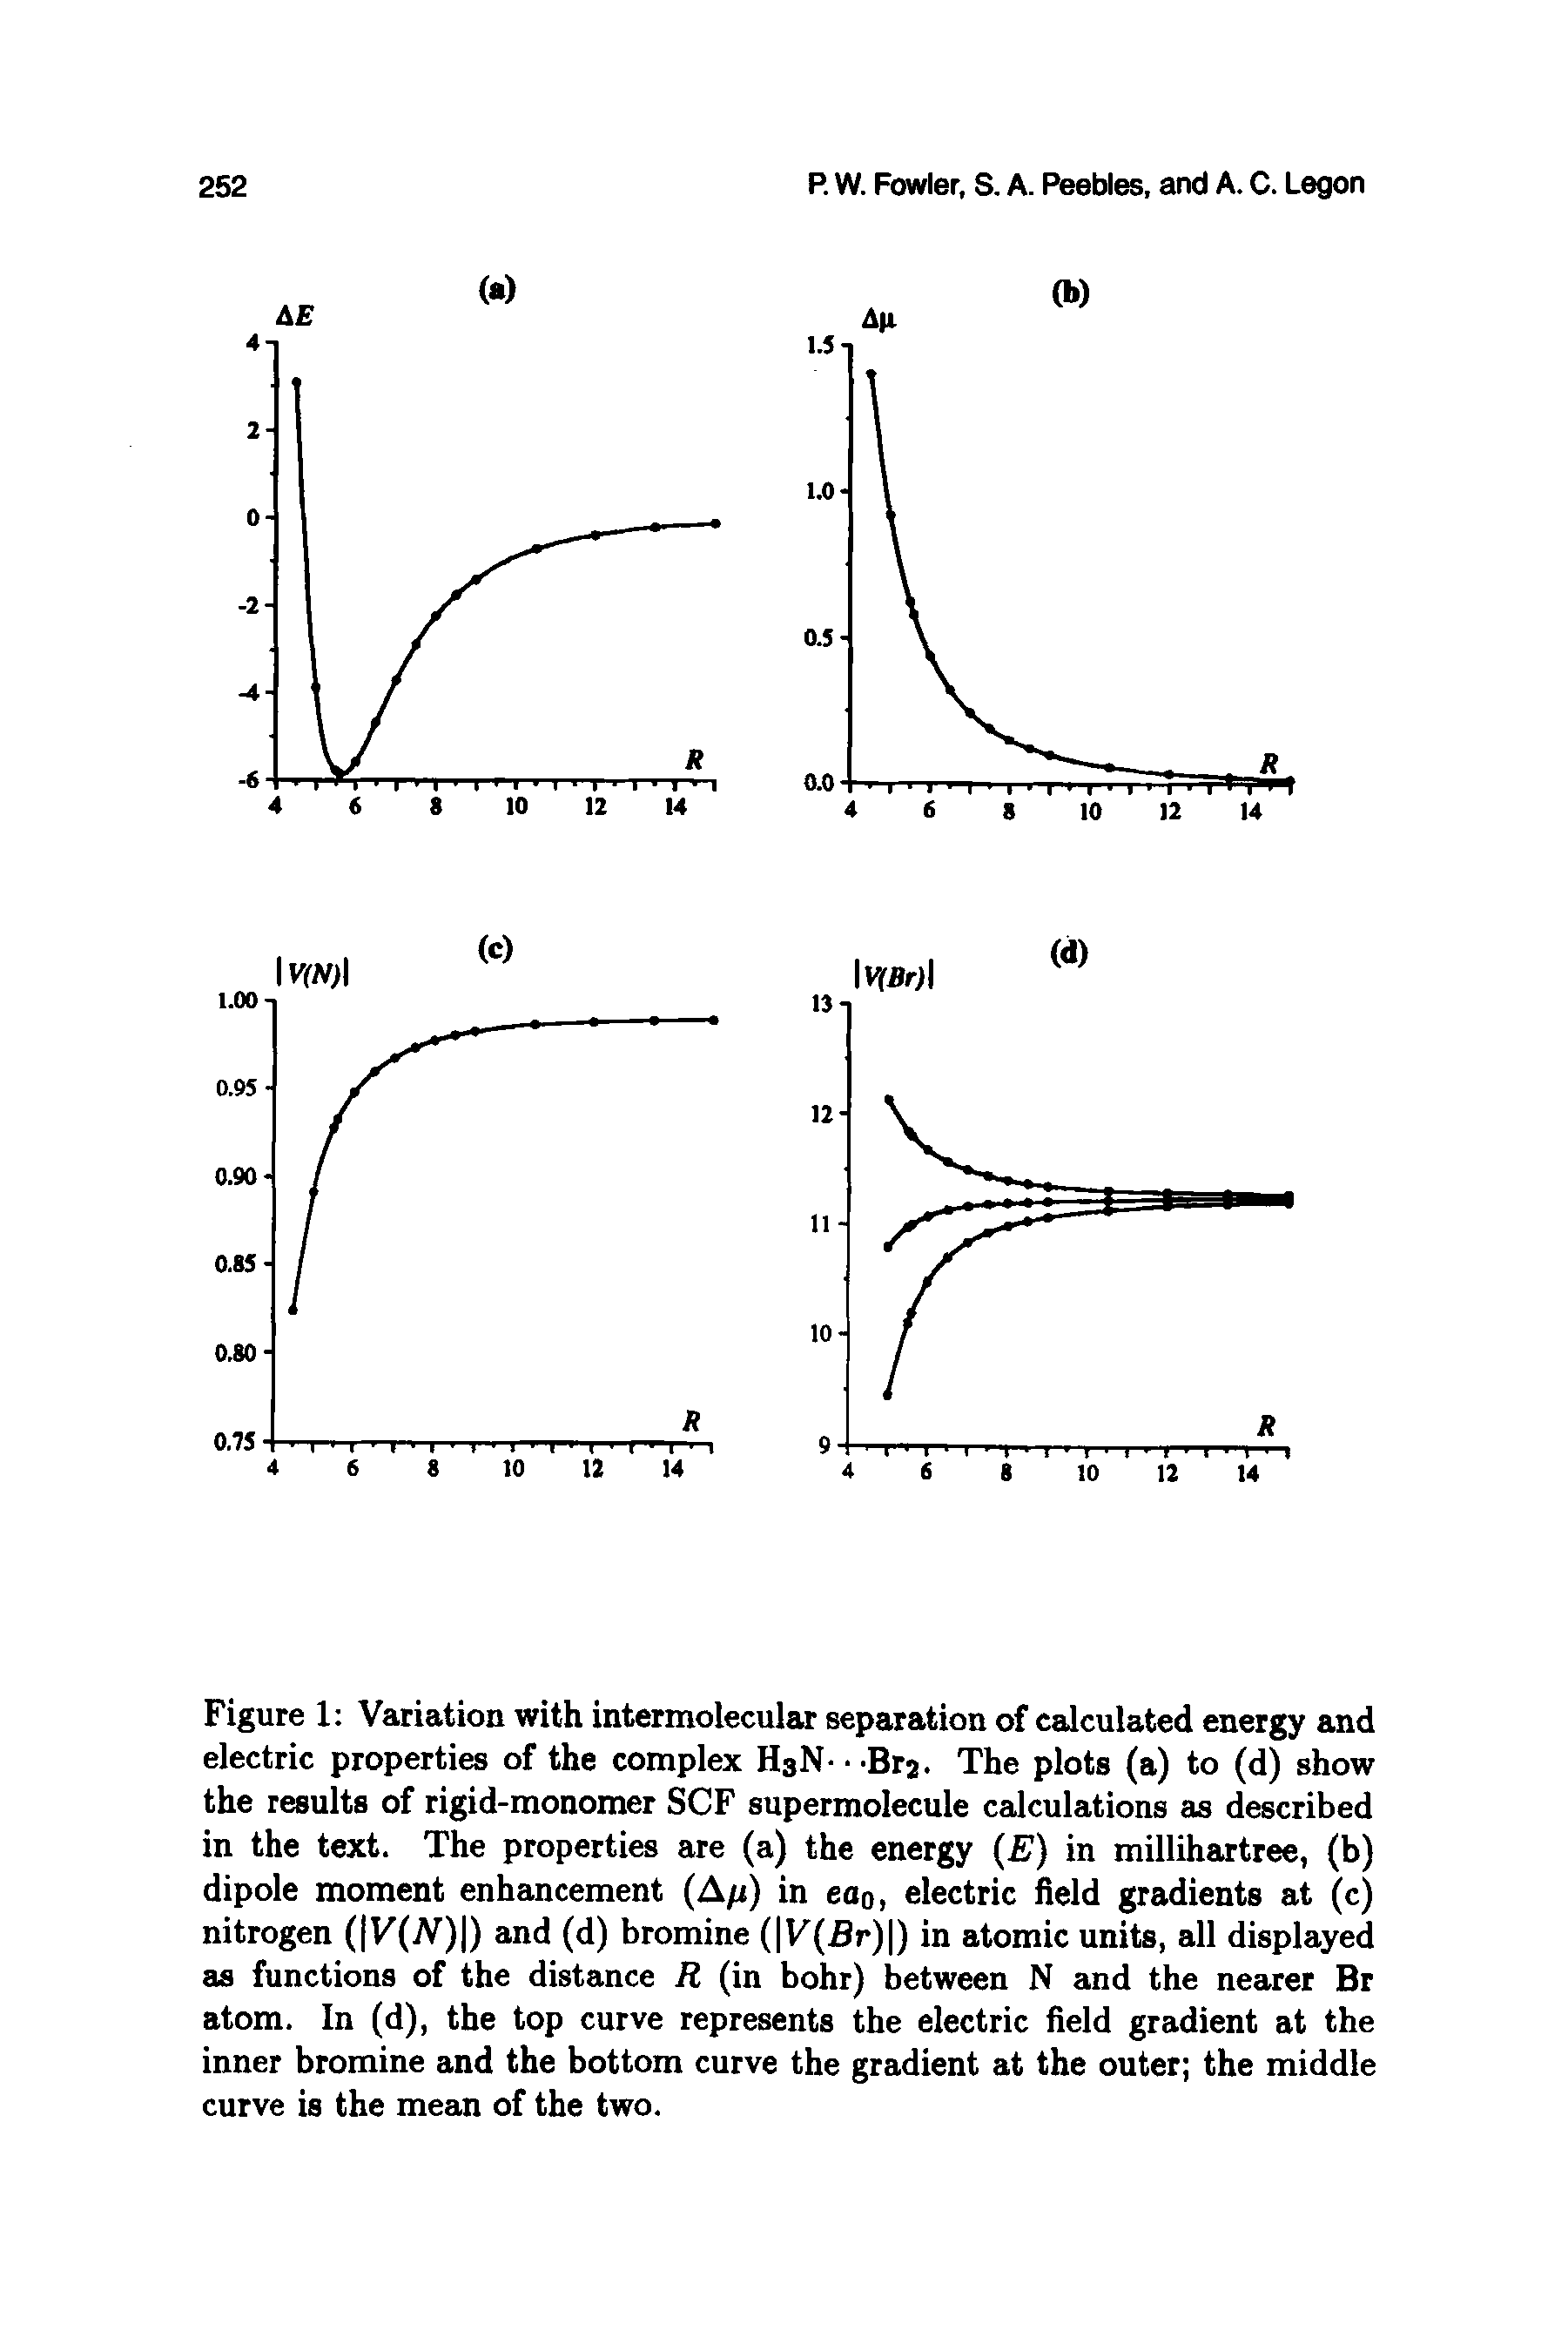 Figure 1 Variation with intermolecular separation of calculated energy and electric properties of the complex HsN- -Bra. The plots (a) to (d) show the results of rigid-monomer SCF supermolecule calculations as described in the text. The properties are (a) the energy (E) in millihartree, (b) dipole moment enhancement (A/z) in ea0, electric field gradients at (c) nitrogen ( V(iV) ) and (d) bromine ( V(Br) ) in atomic units, all displayed as functions of the distance R (in bohr) between N and the nearer Br atom. In (d), the top curve represents the electric field gradient at the inner bromine and the bottom curve the gradient at the outer the middle curve is the mean of the two.